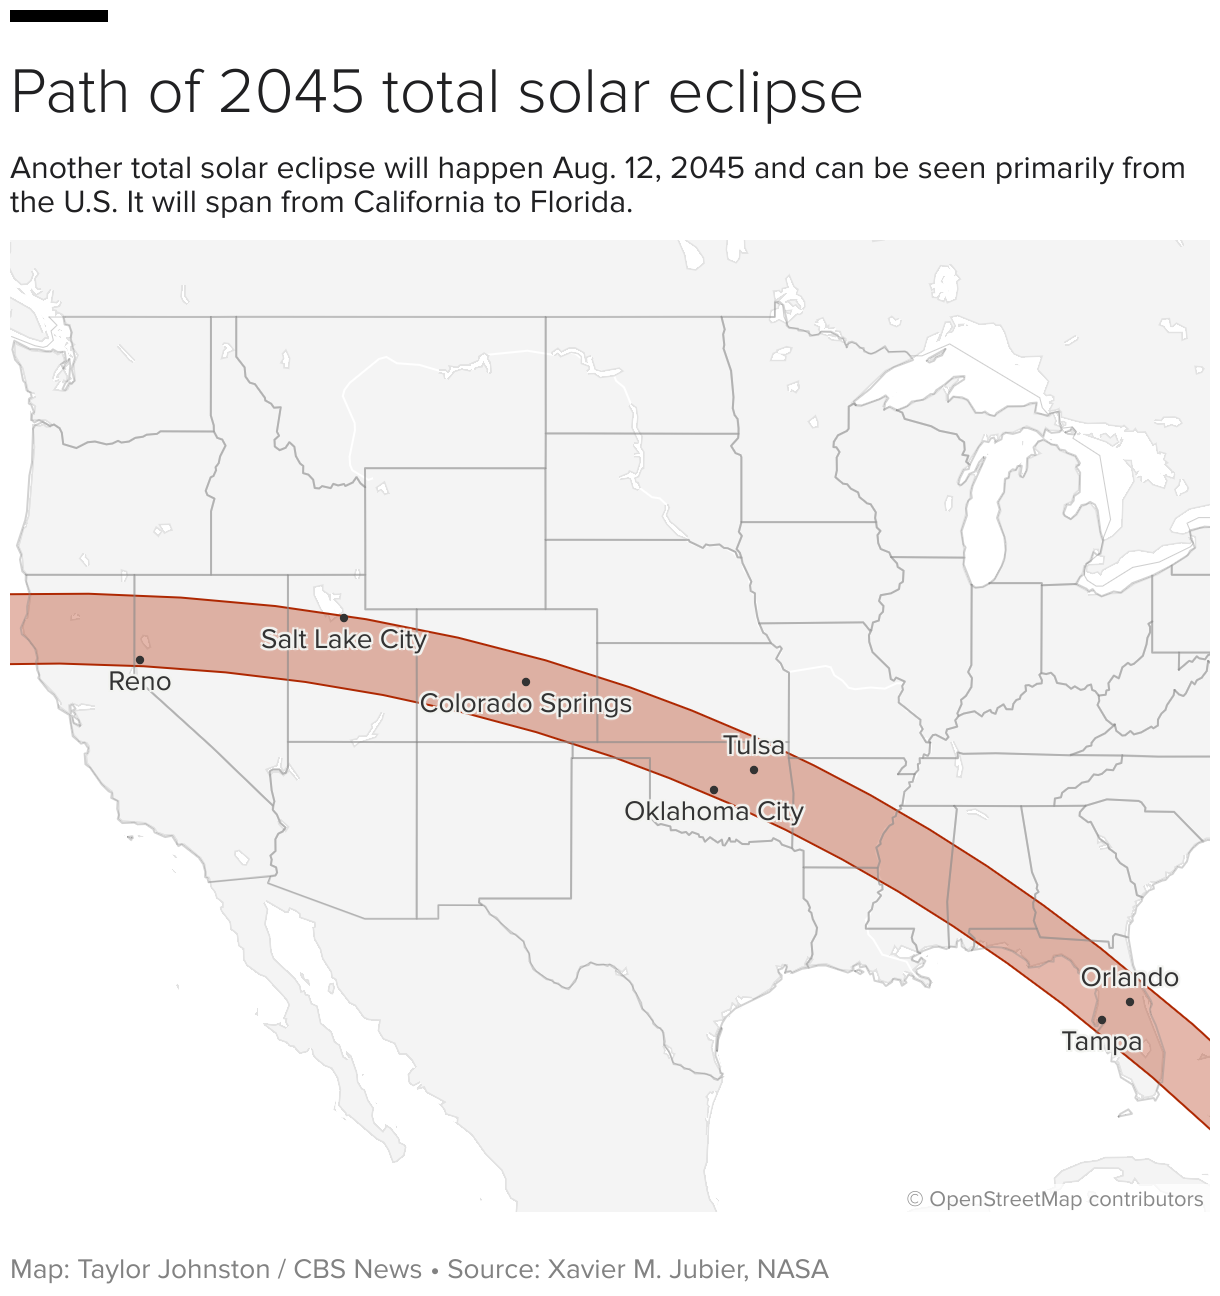 United states map showing the path of the 2045 solar eclipse.